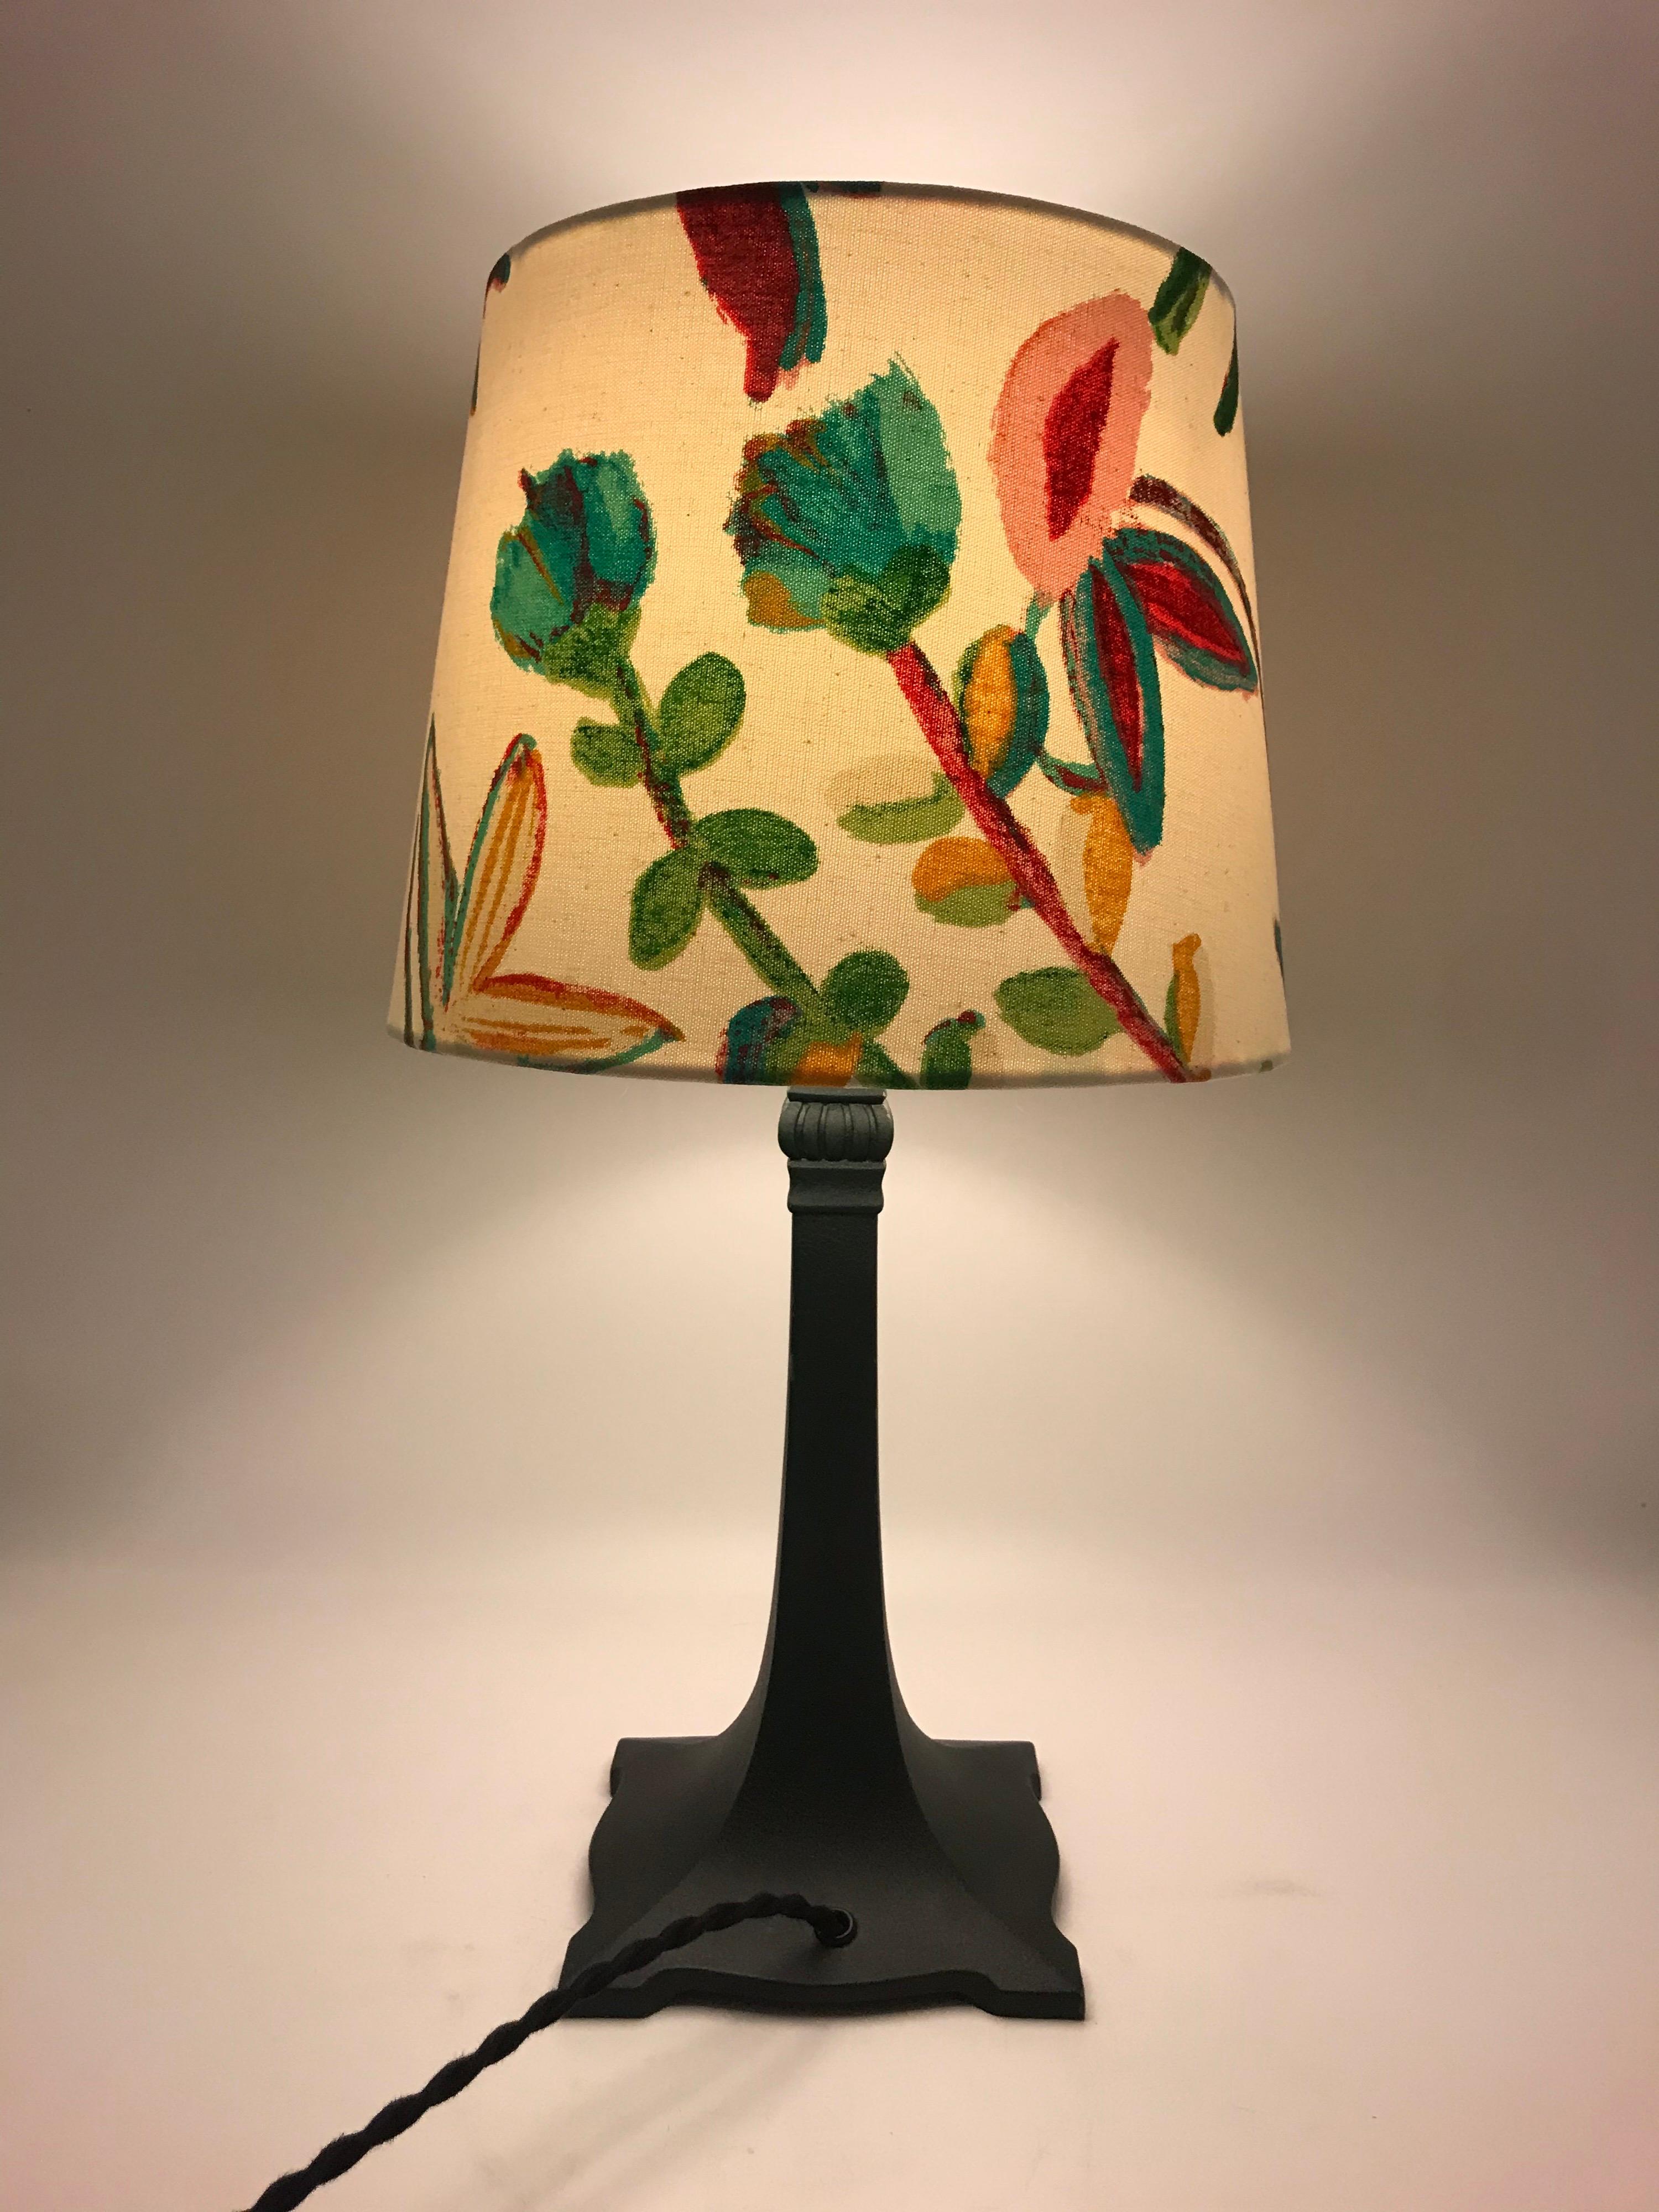 Beautiful Art Deco table lamp in bronze metal alloy and with original green paint to the surface.
The floral print on the white cotton Shade look amazing together with this lamp.
Rewired and ready to plug in.
Can be fitted with an EU or US